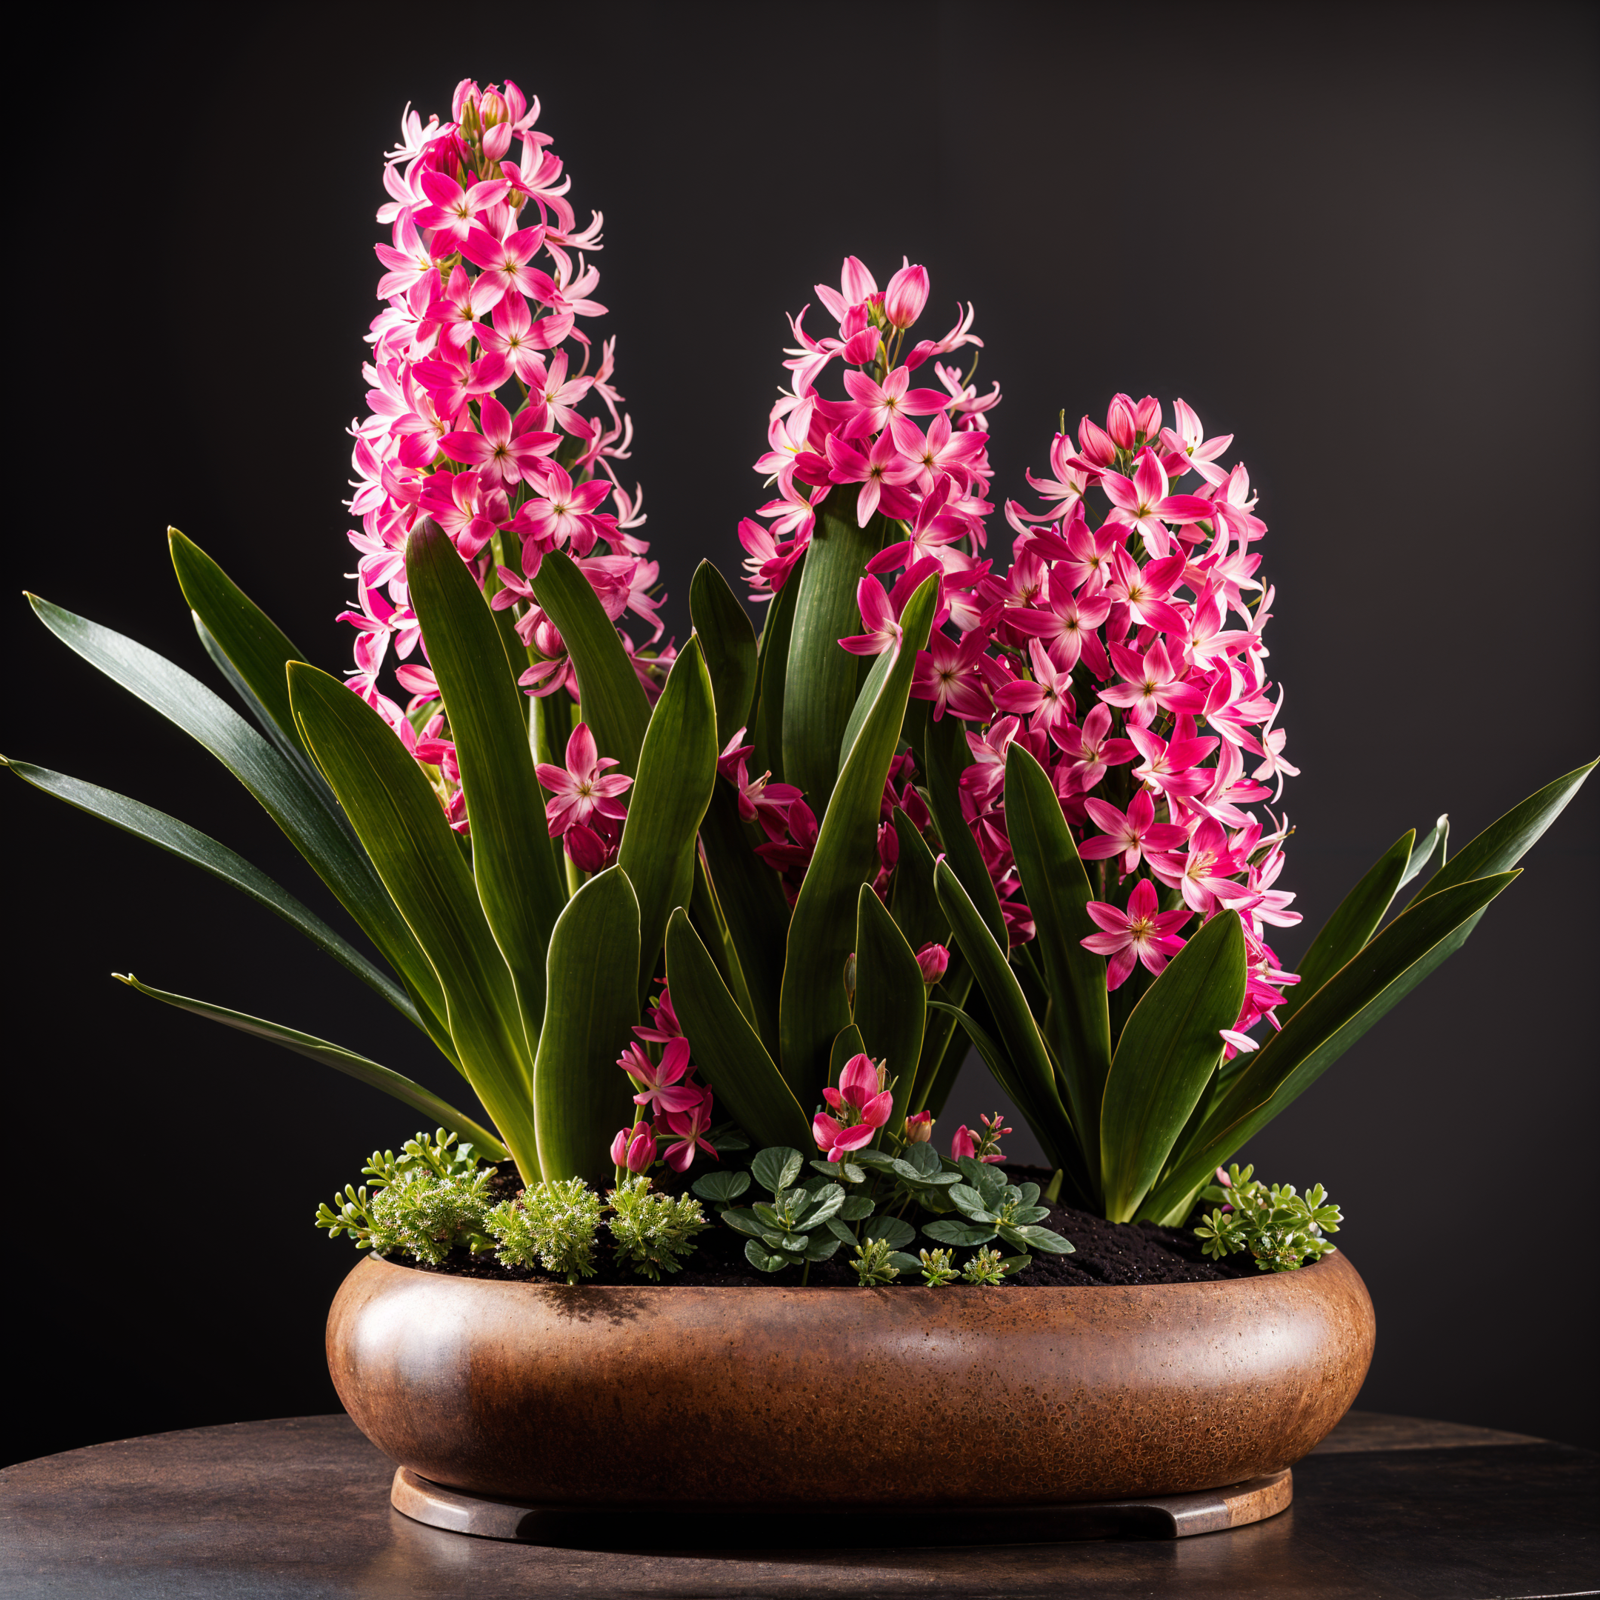 Hyacinthus orientalis in a planter, blooming under clear indoor lighting, against a dark background.